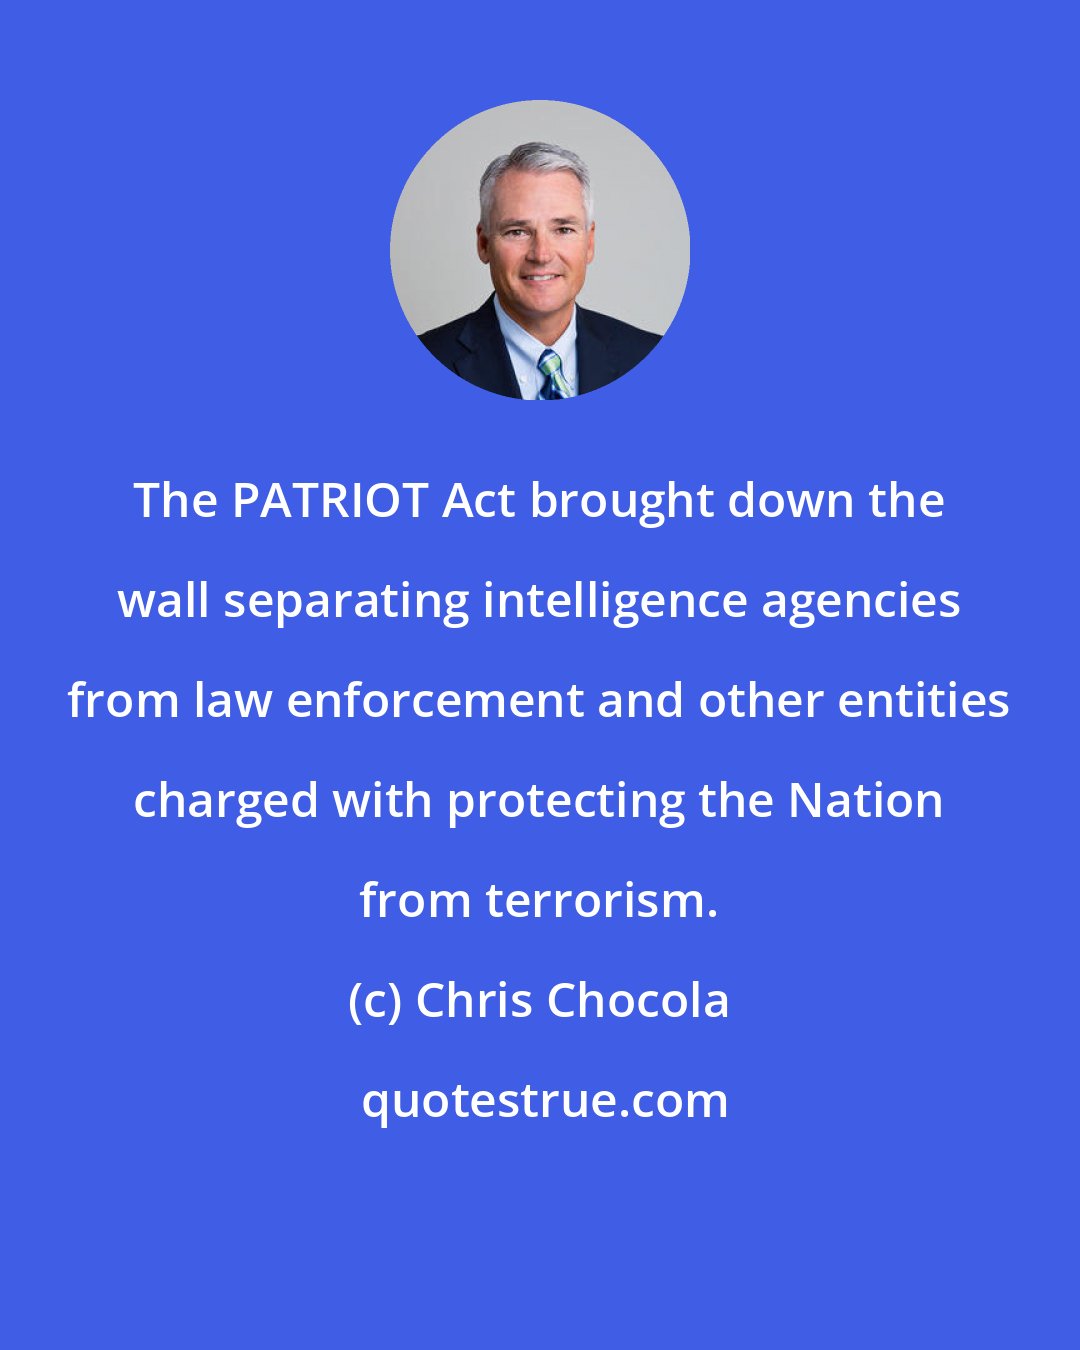 Chris Chocola: The PATRIOT Act brought down the wall separating intelligence agencies from law enforcement and other entities charged with protecting the Nation from terrorism.